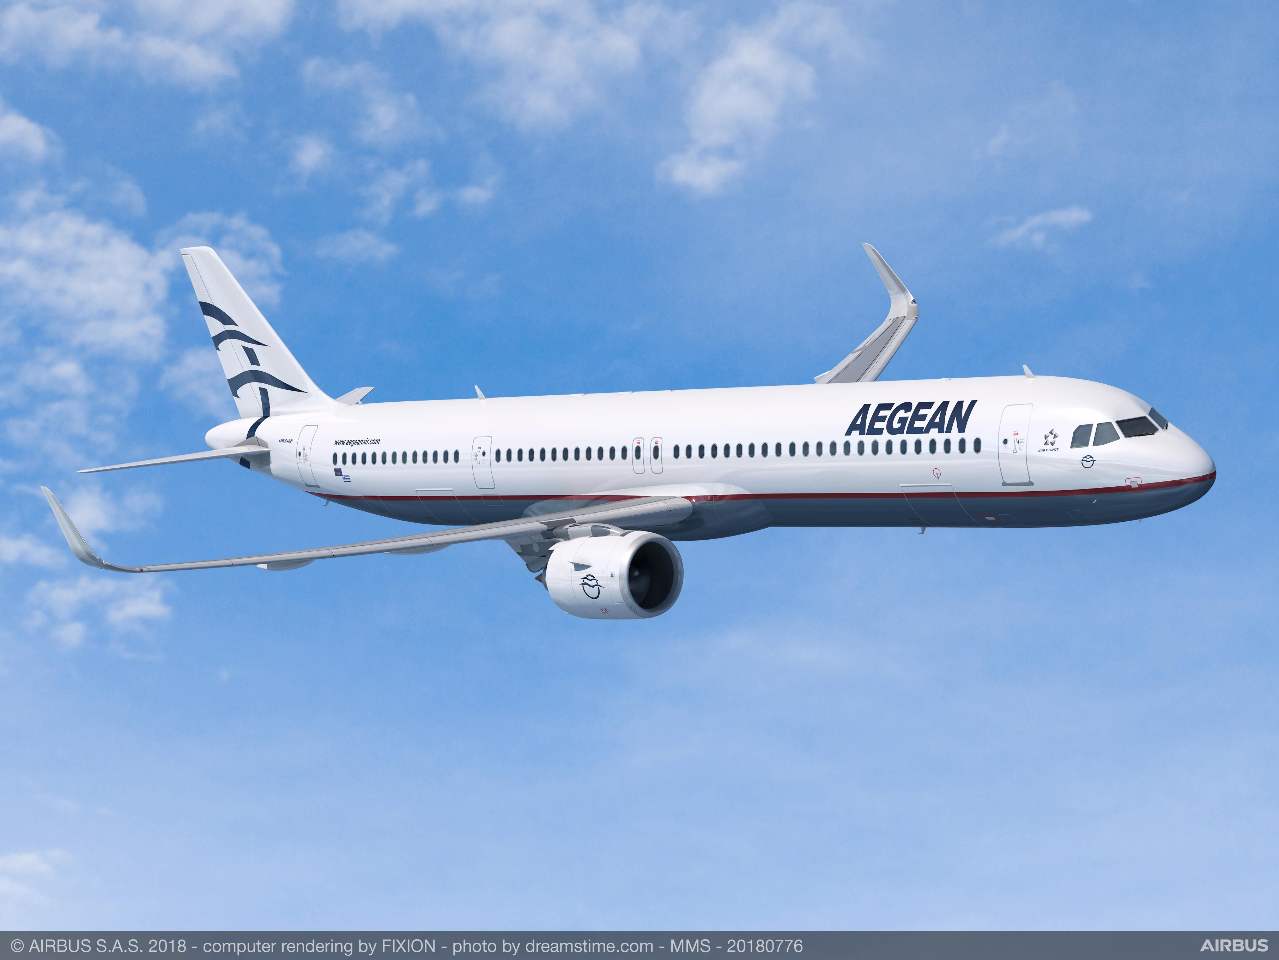 Aegean Airlines confirme ses 20 Airbus A320neo et A321neo